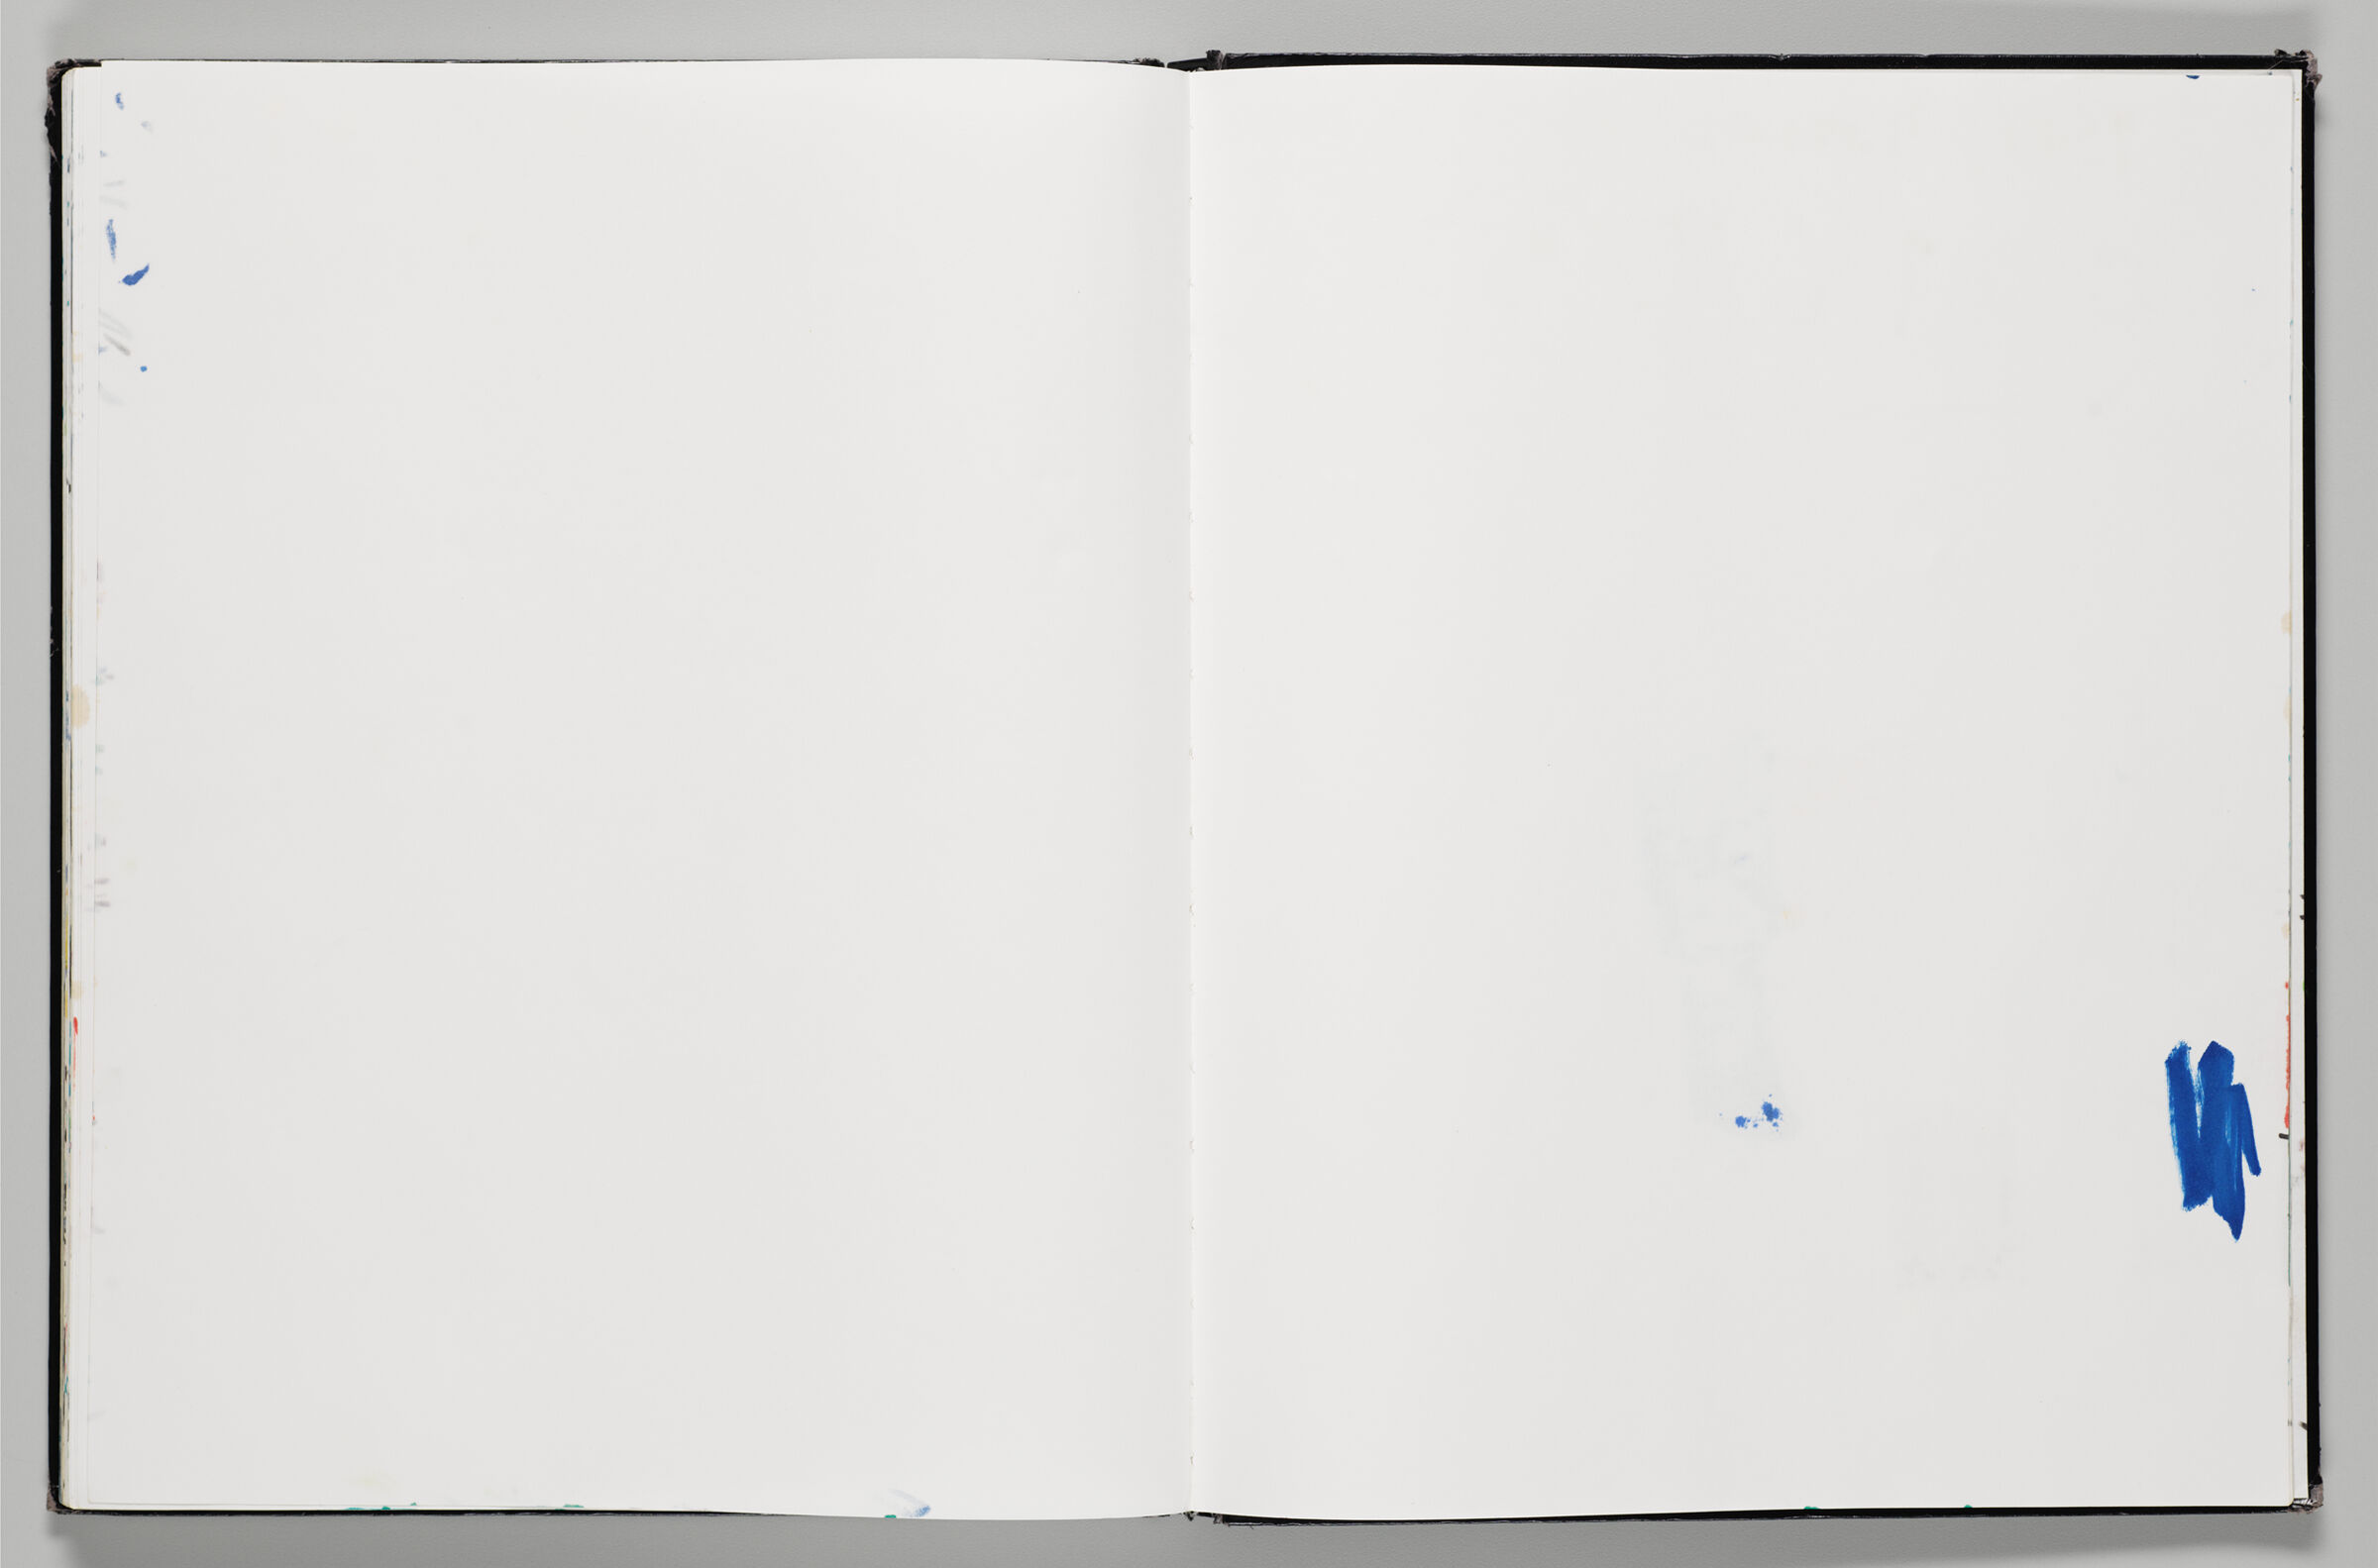 Untitled (Blank, Left Page); Untitled (Small Marker Test, Right Page)